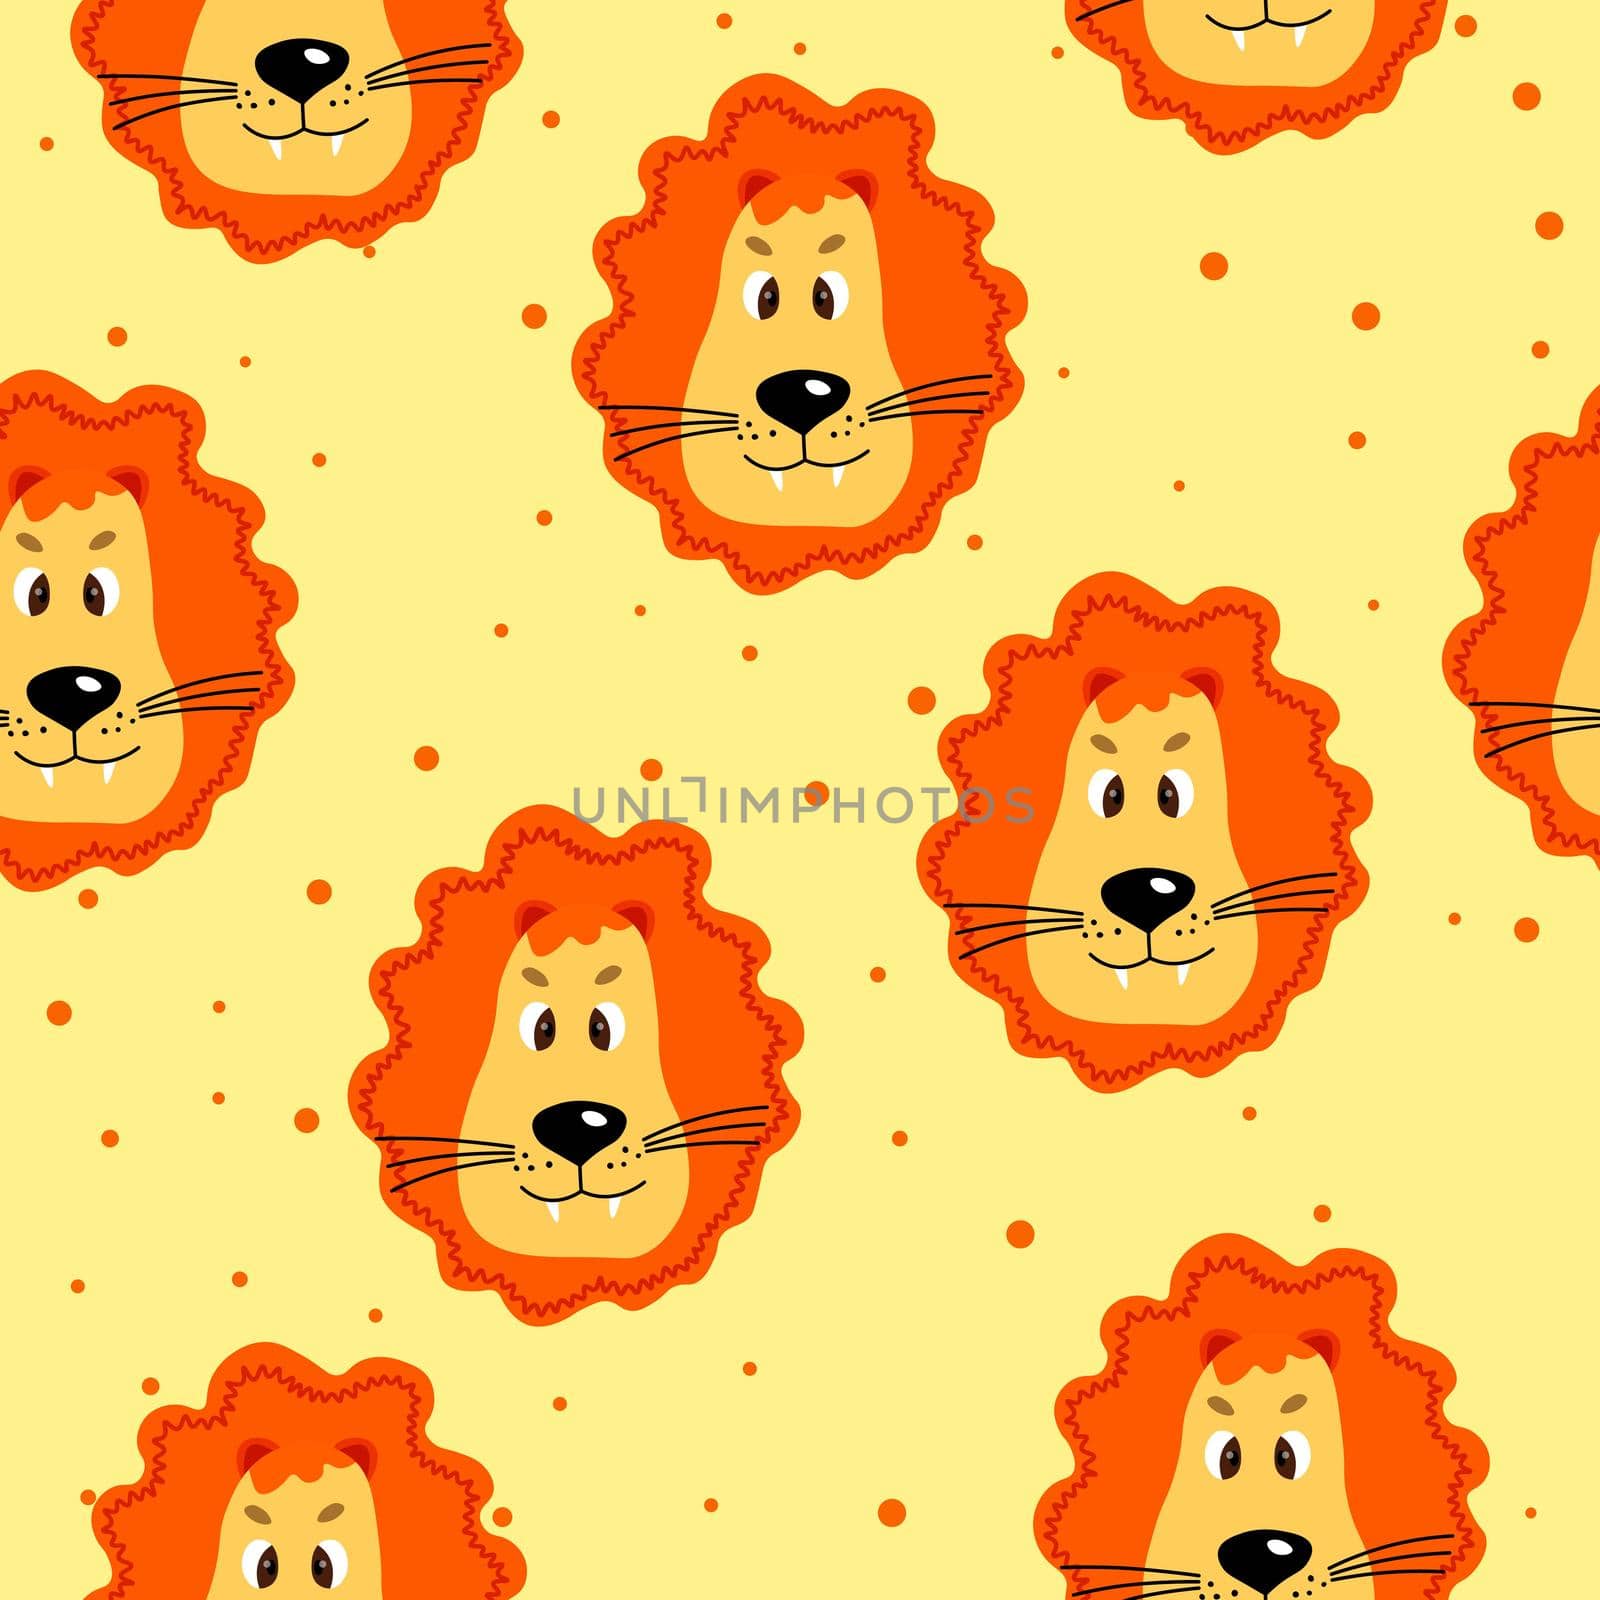 Vector flat animals colorful illustration for kids. Seamless pattern with cute lion face on yellow polka dots background. Adorable cartoon character. Design for textures, card, poster, fabric, textile